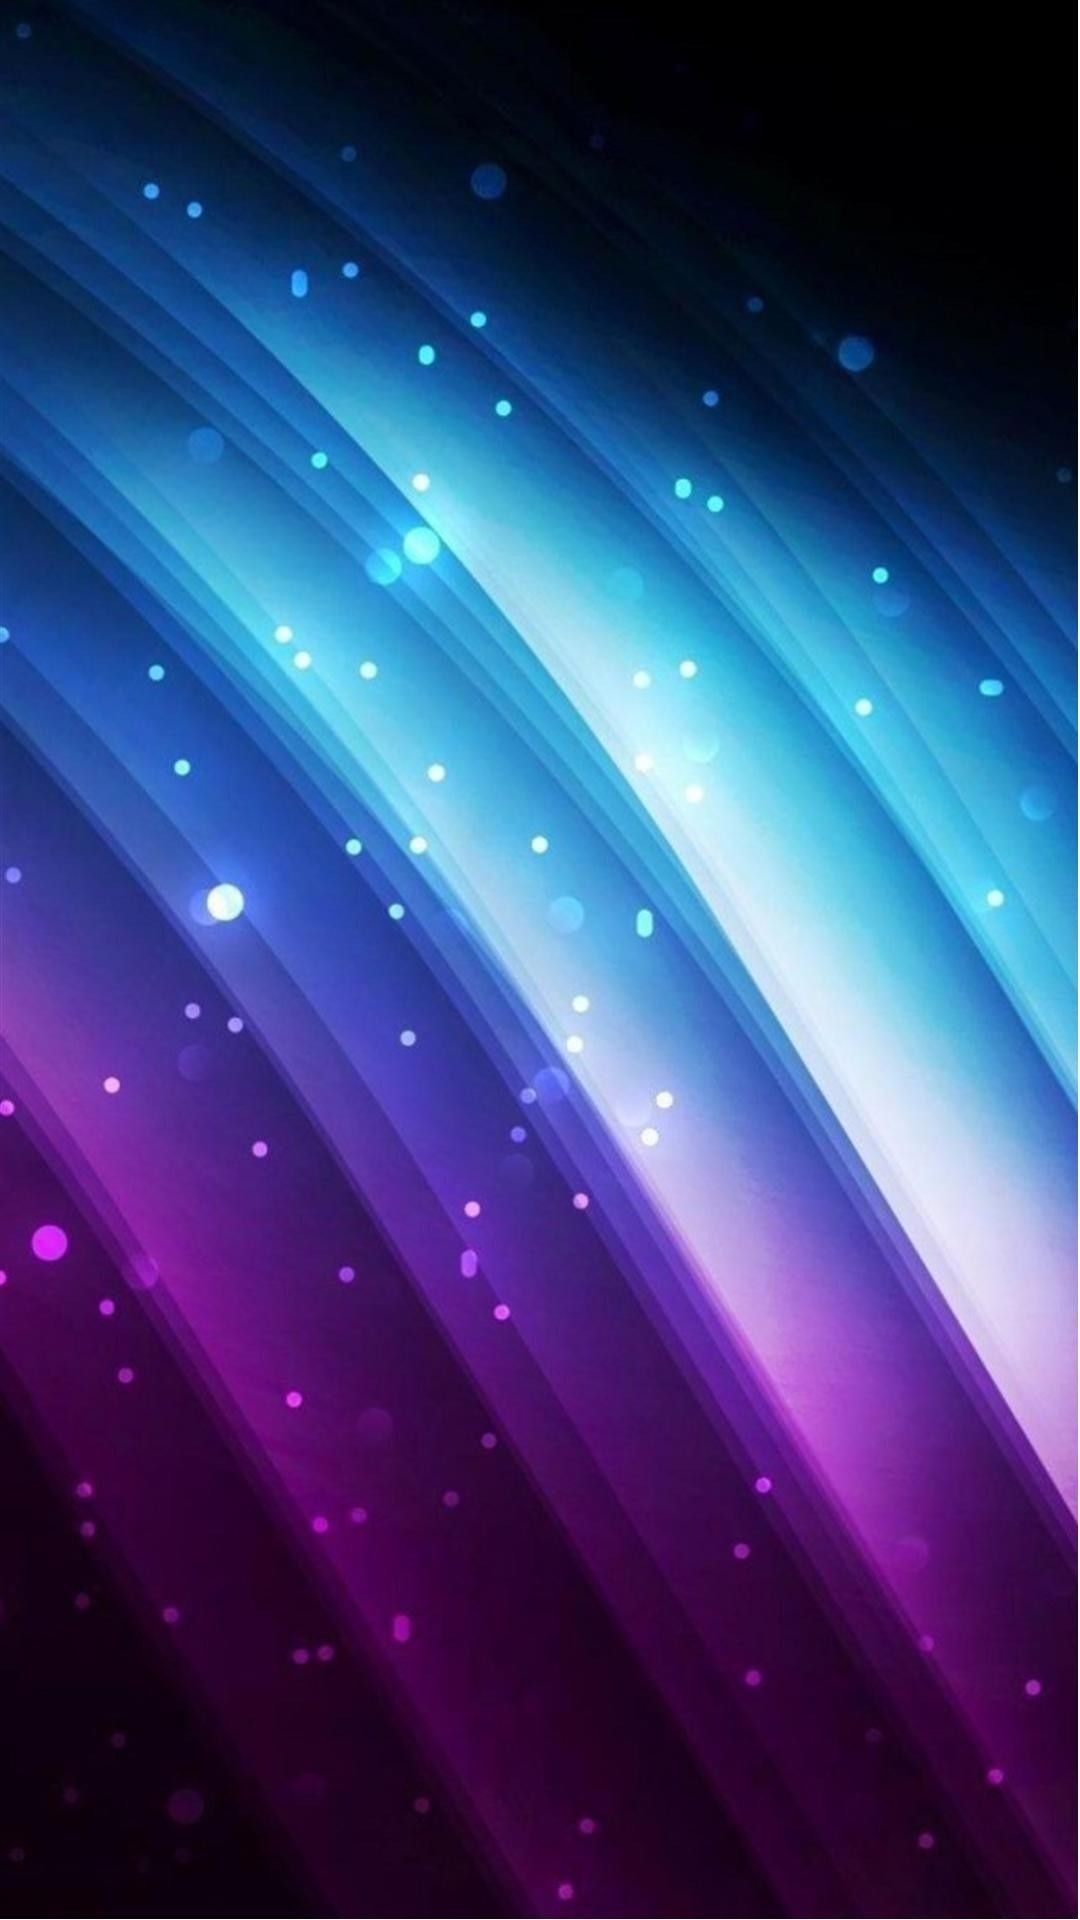 phone wallpapers and themes,blue,violet,purple,light,sky